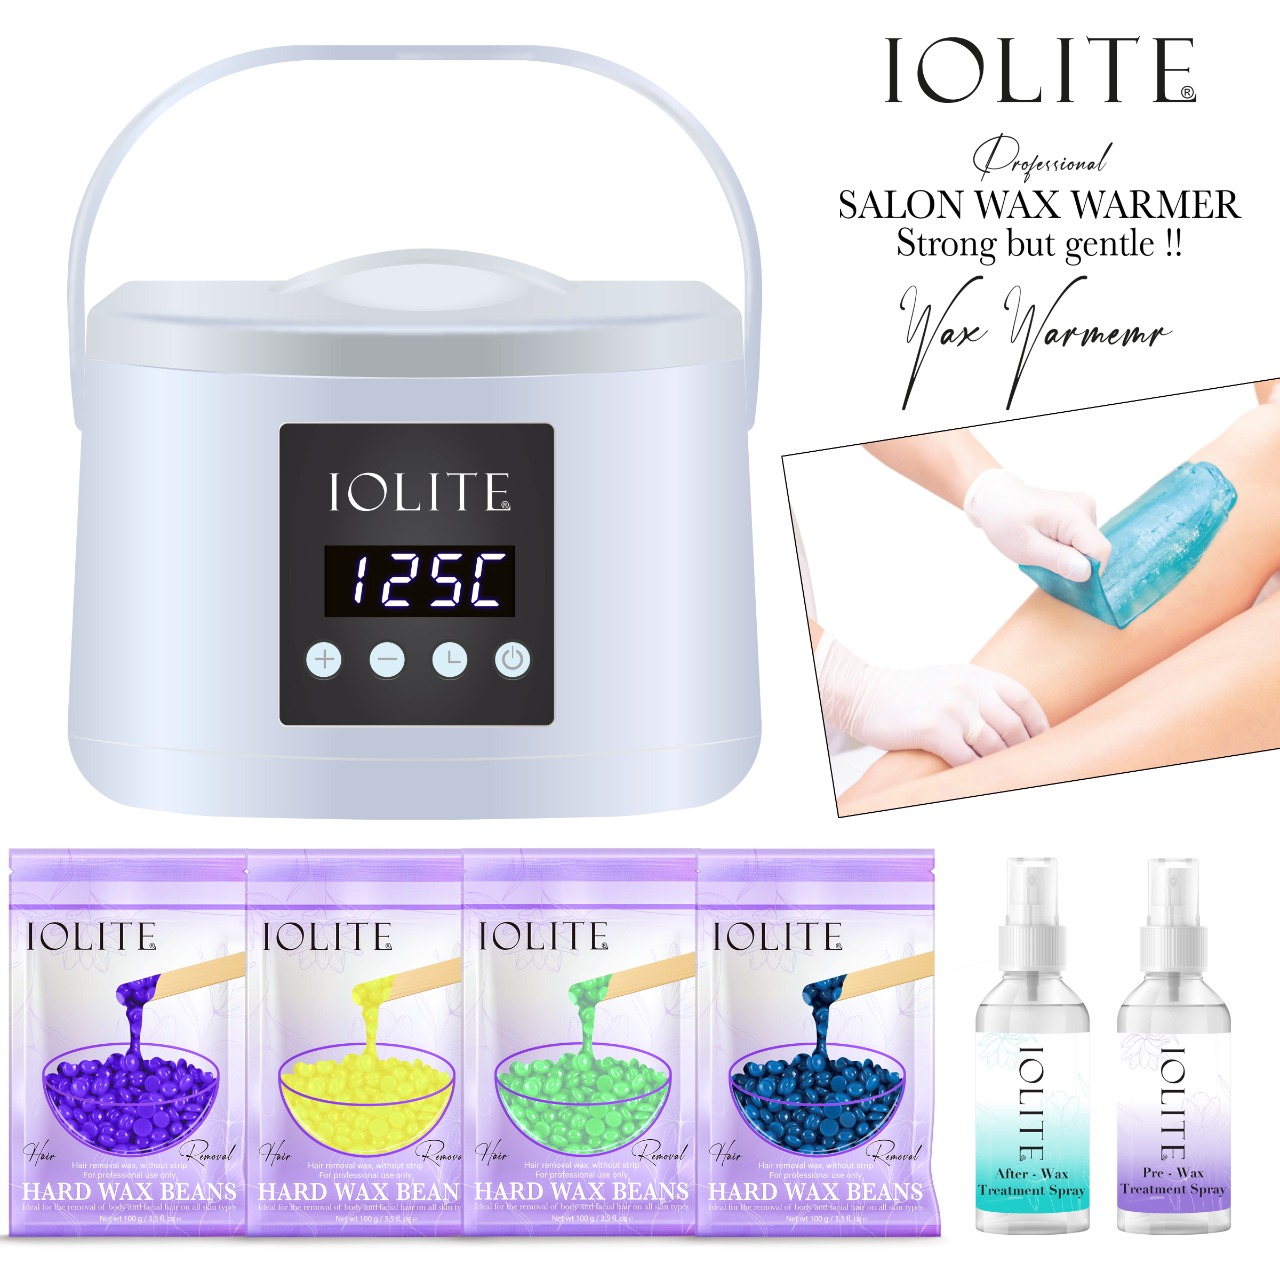 slope smuggling Hostile Hair Removal tools Smart Professional Warmer Wax Heater SPA Hands Feet  Epilator Depilatory Skin Care Paraffin Wax Machine Kit | Nail Technician  courses - Stayve BB Glow - Eyelash Extension - Microblading